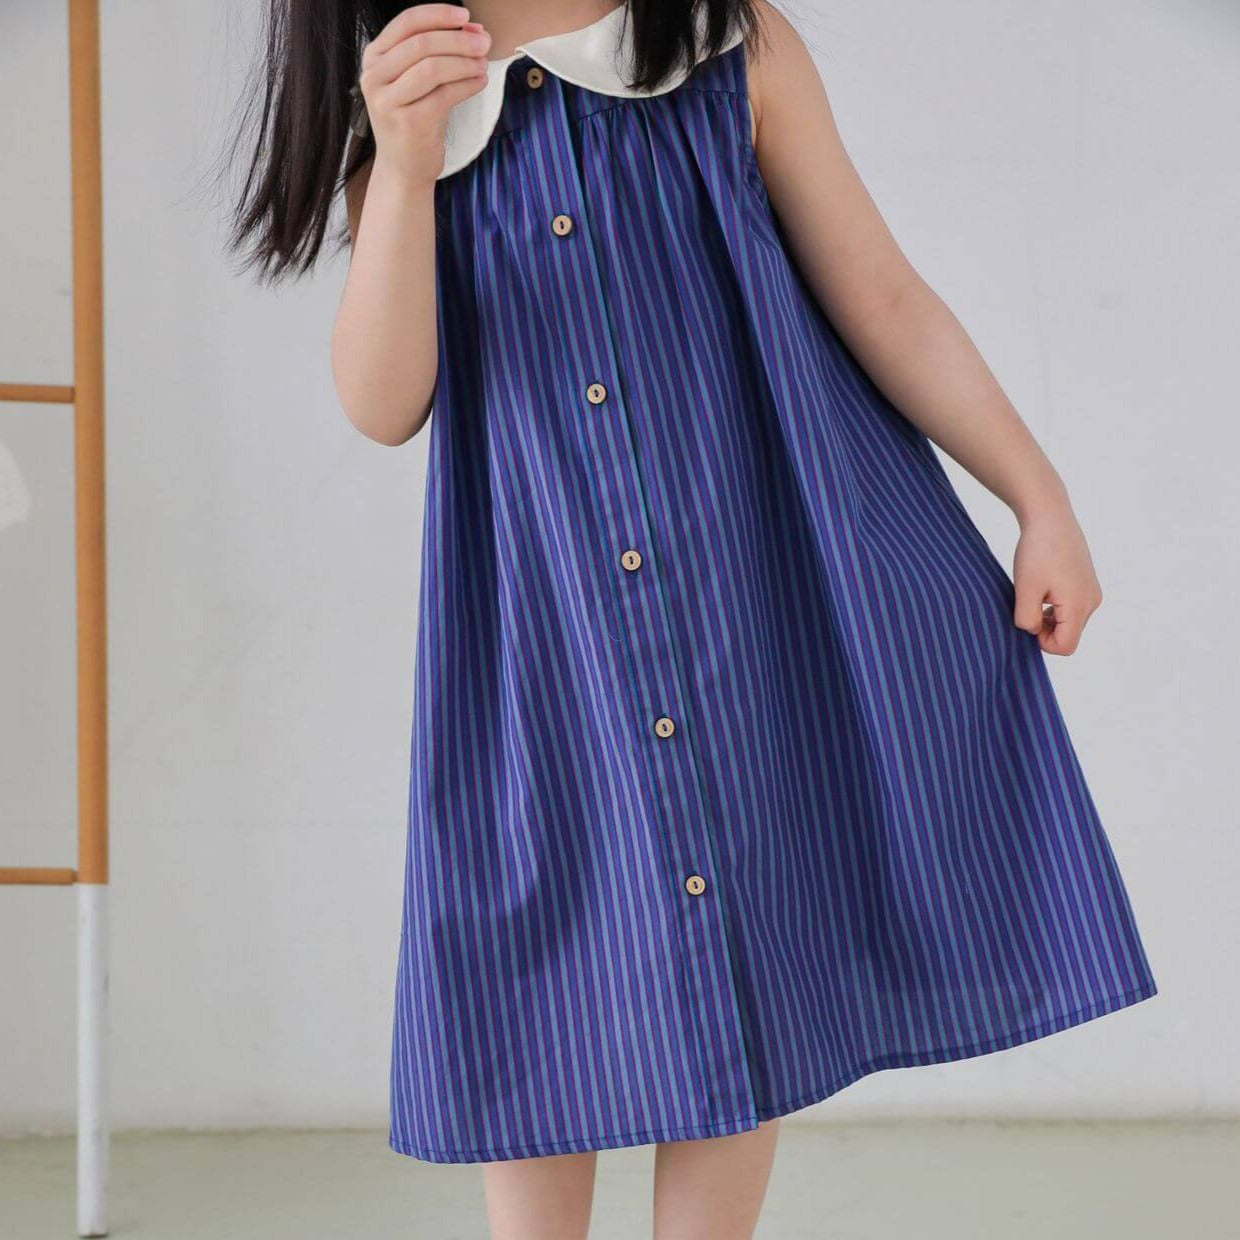 Adorable Scallop Collar Stripped Dress,2T to 8T.